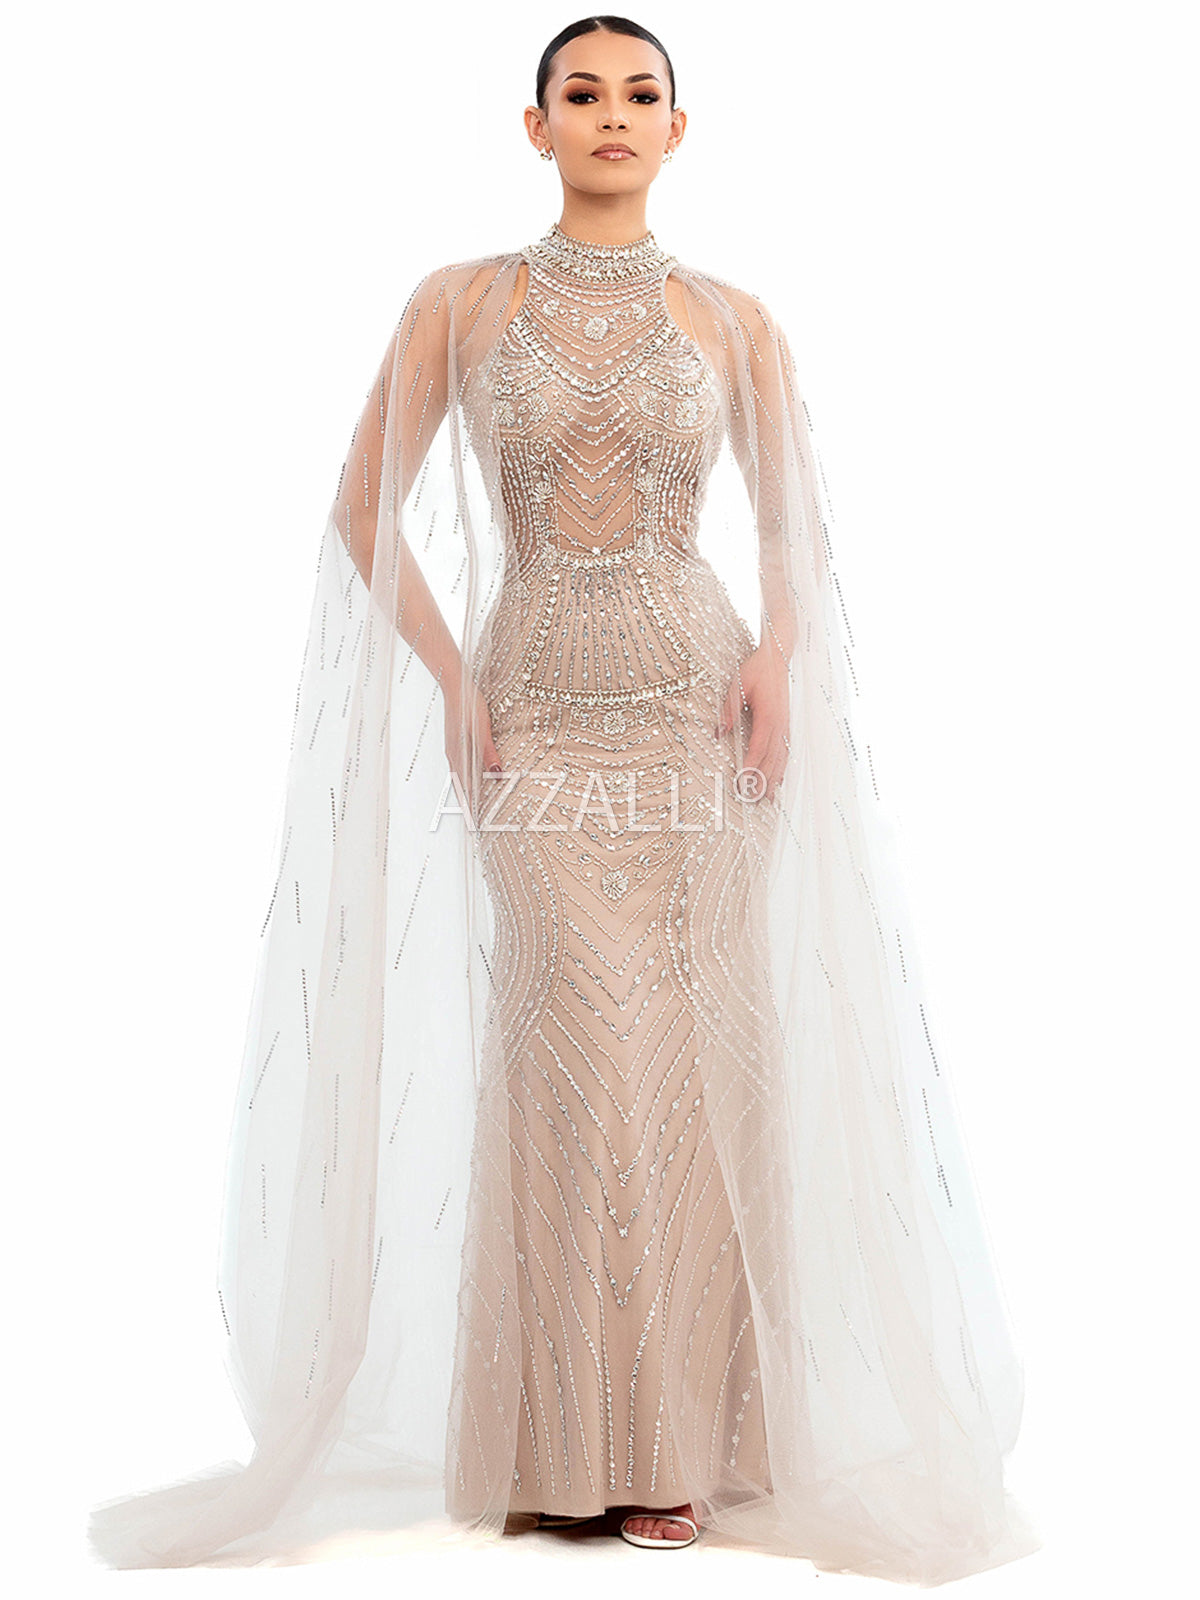 Azzalli Luxury Beaded Gown Dress Canada USA Australia UK Europe United Kingdom Hand Embellished Evening Dress Affordable Luxury   Worldwide Shipping Black Tie Wedding Event Mother of the Bride Prom Reception High End Quality Celebrity Fancy Elegant Timeless Sophisticated Feminine Sexy High Split Fitted Hourglass Flattering Local North American Couture Brand Name Azzalli  Women Prom Dress Prom Gown 